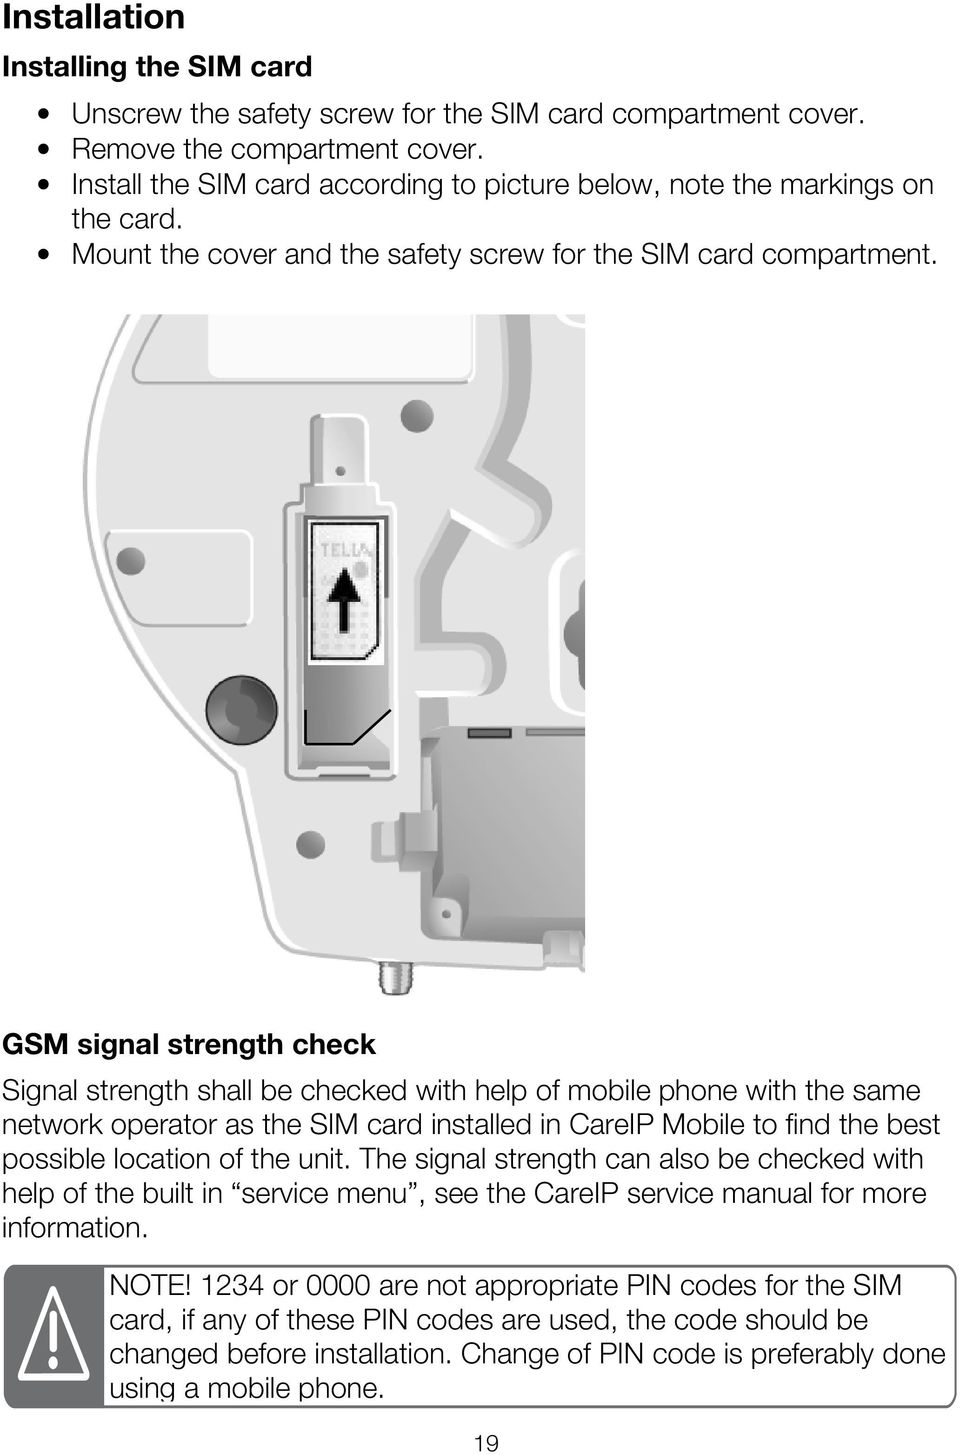 GSM signal strength check Signal strength shall be checked with help of mobile phone with the same network operator as the SIM card installed in CareIP Mobile to find the best possible location of